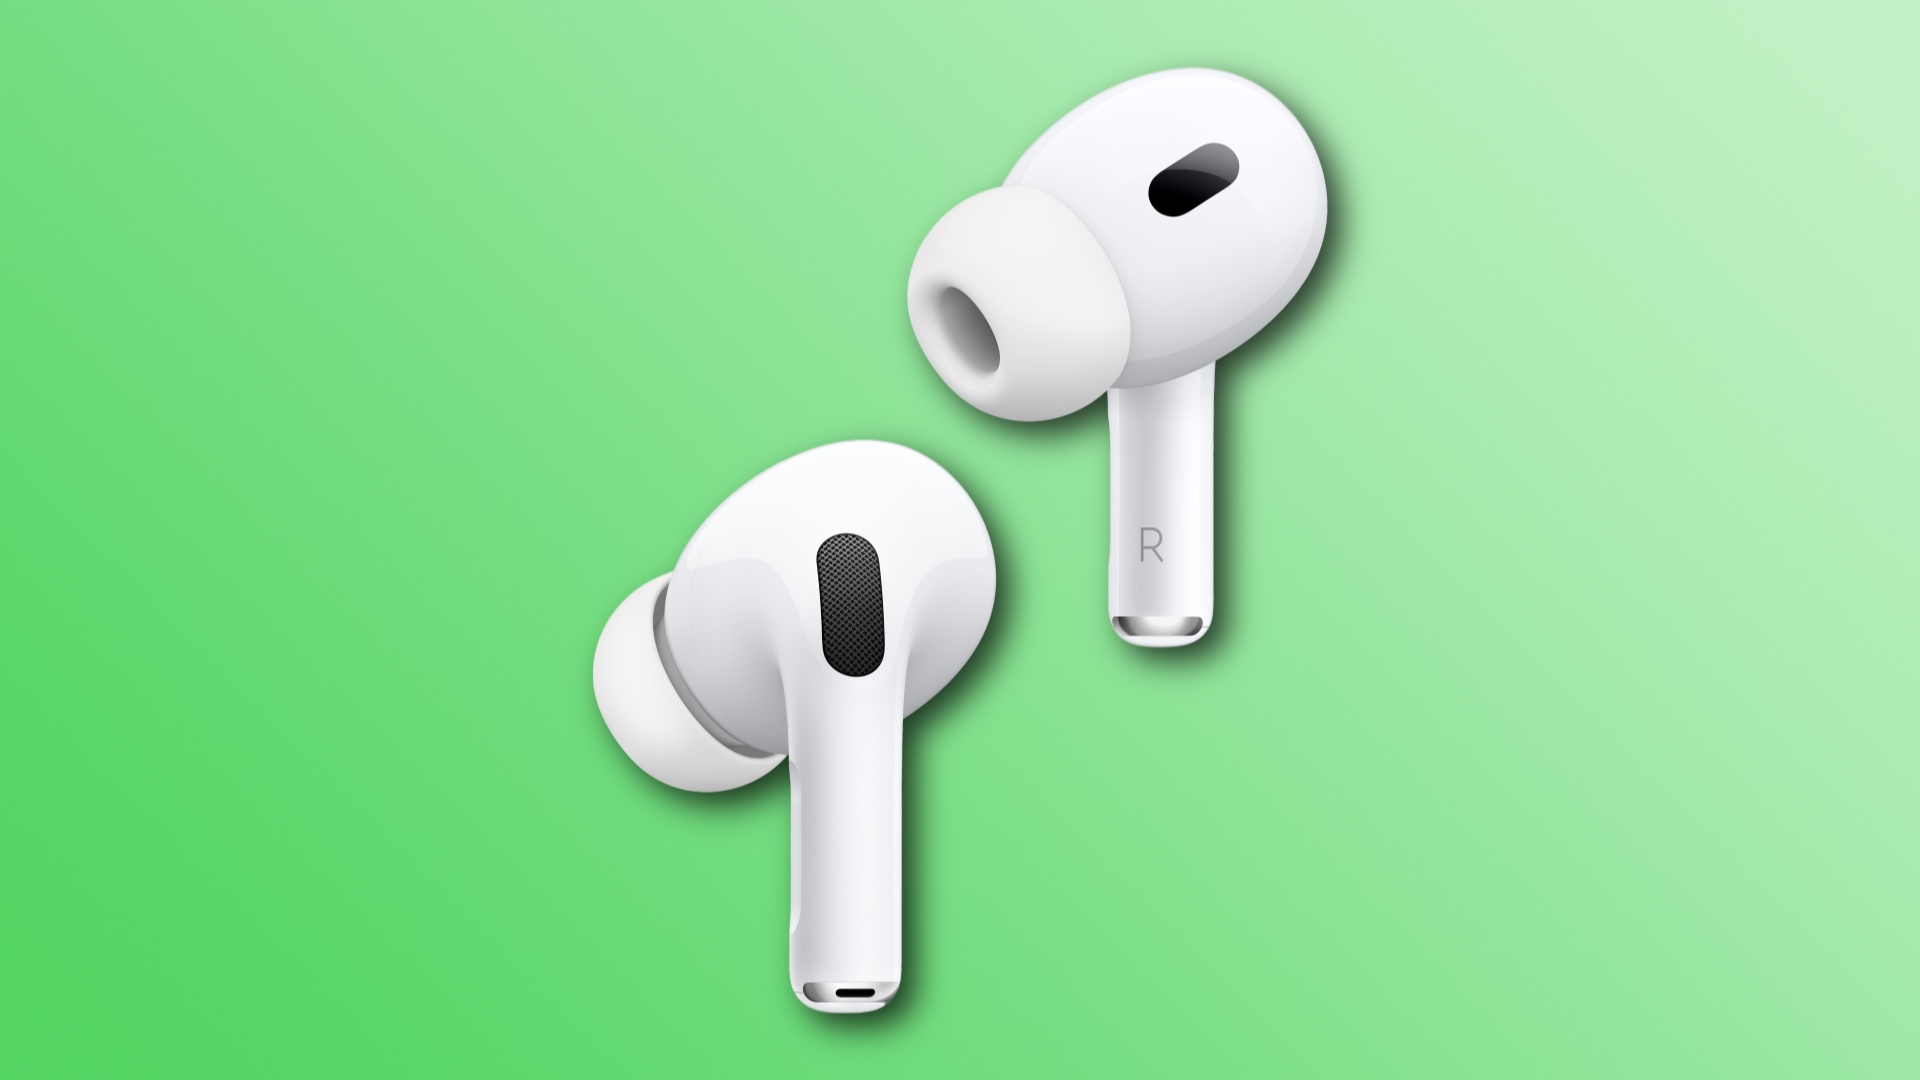 USB-C AirPods could launch alongside the iPhone 15 lineup in September